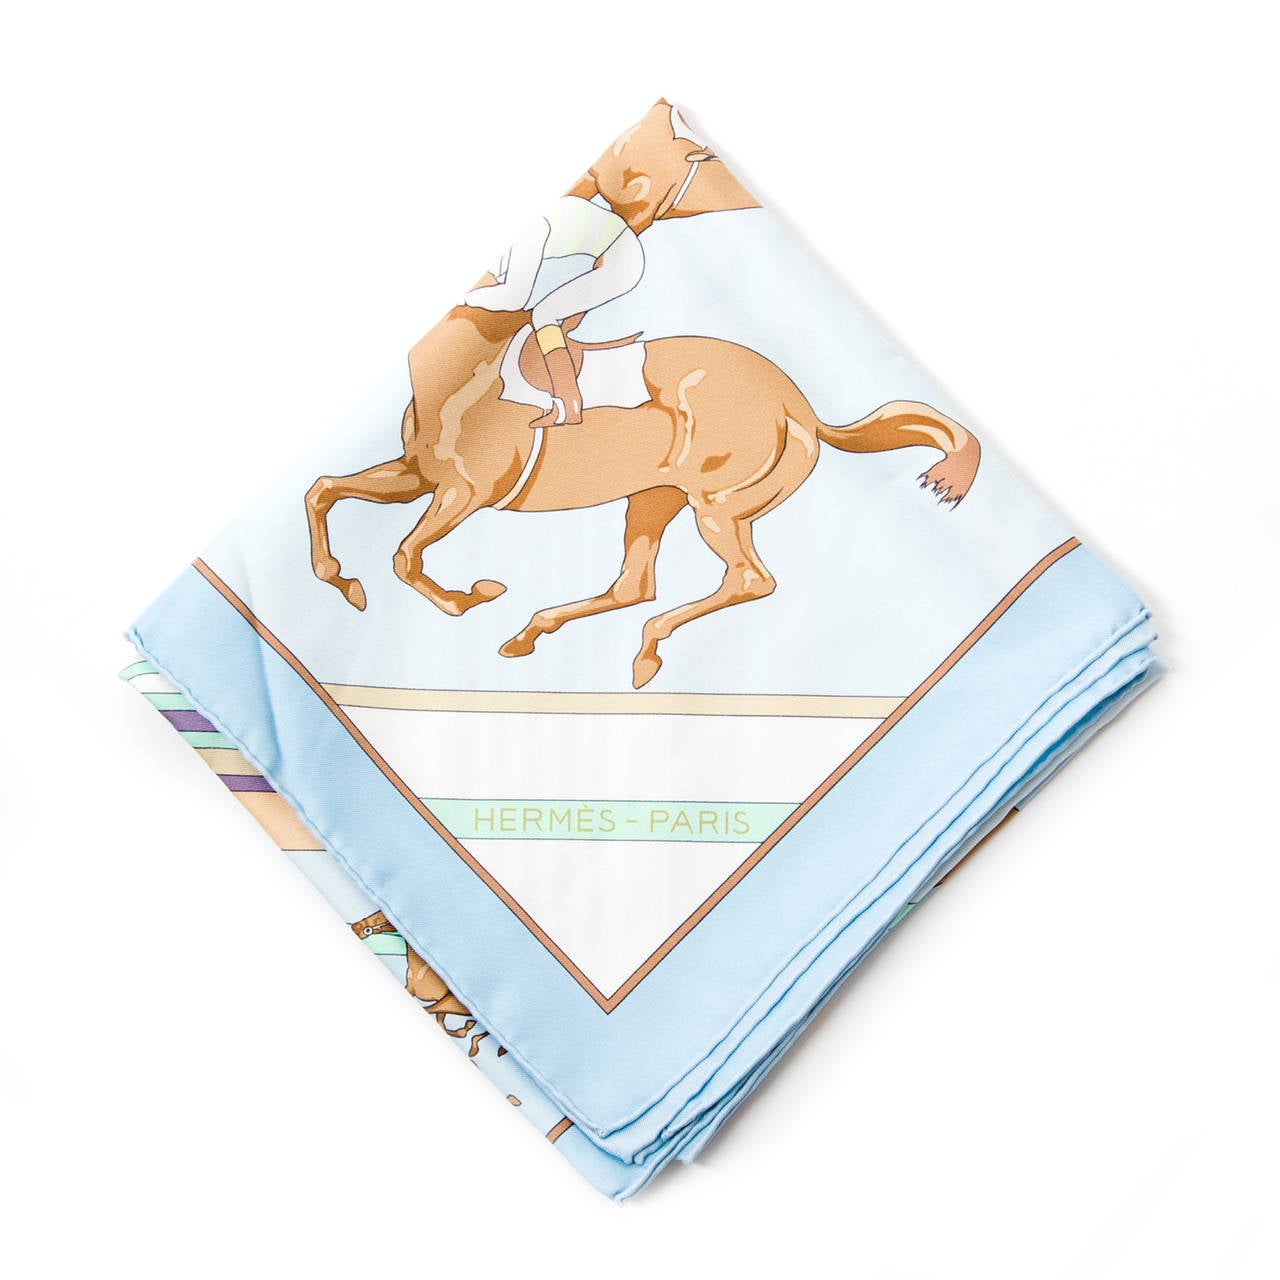 Light blue Hermès scarf in 100% silk. Scarf features image of horse races and colorful stripes.